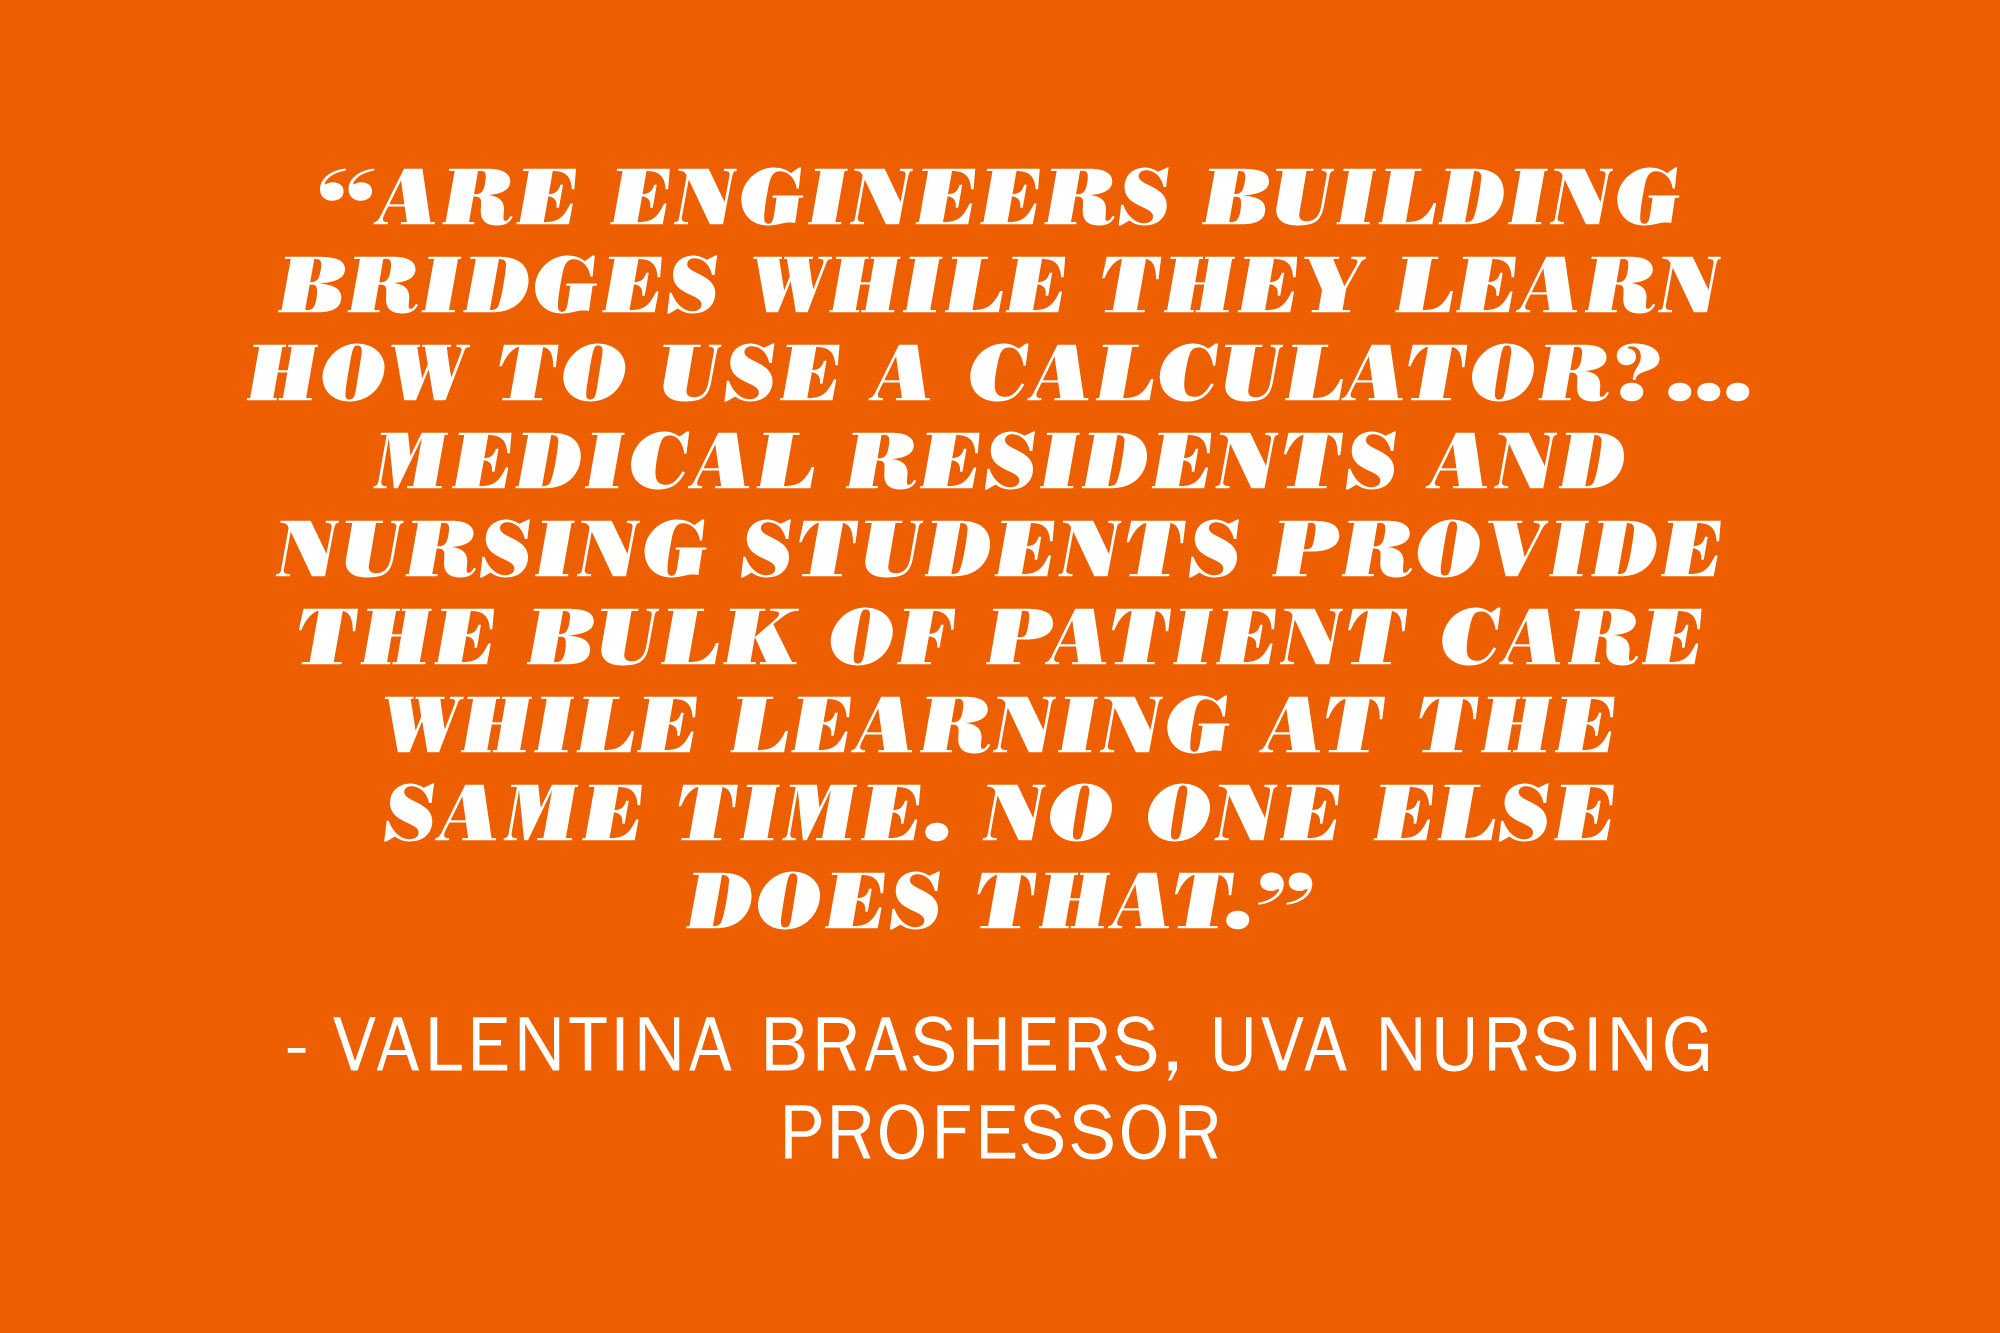 Text reads: Are engineers building bridges while they learn how to use a calculator?... Medical residents and nursing students provide the bulk of patient care while learning at the same time.  No one else does that."  Valentina Brashers, UVA nursing professor